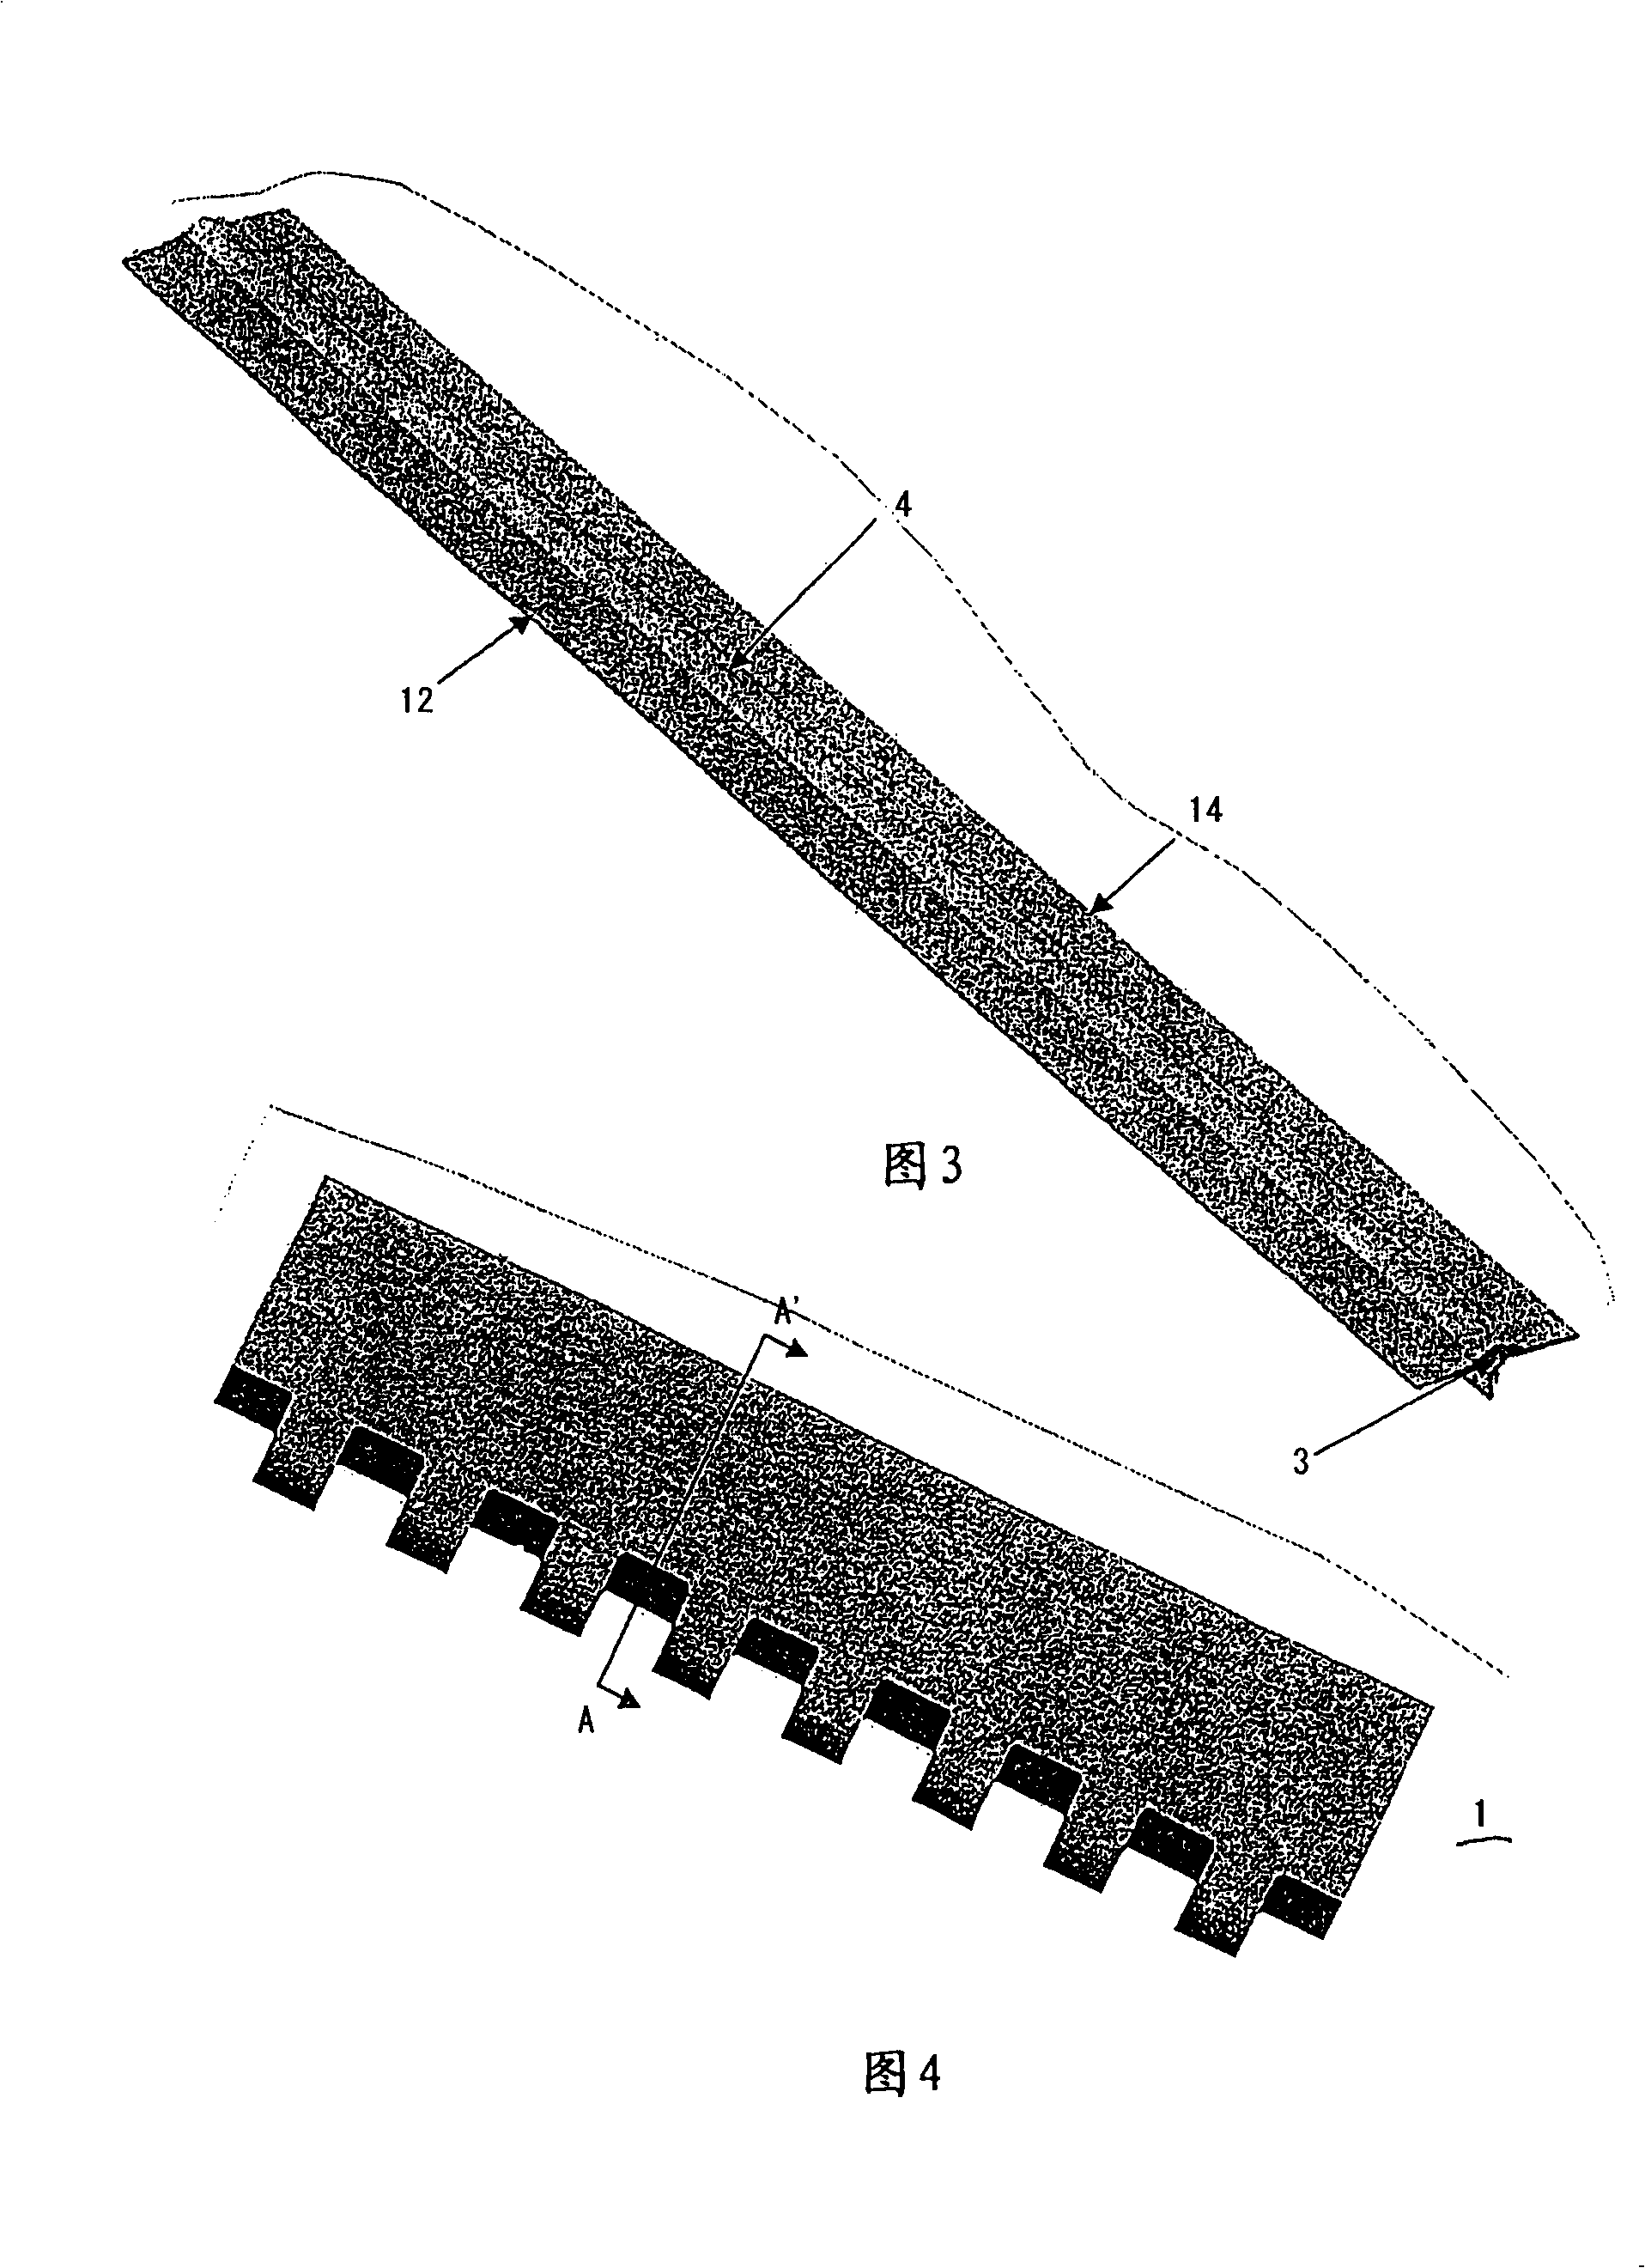 Covering device for a hinge of an aircraft